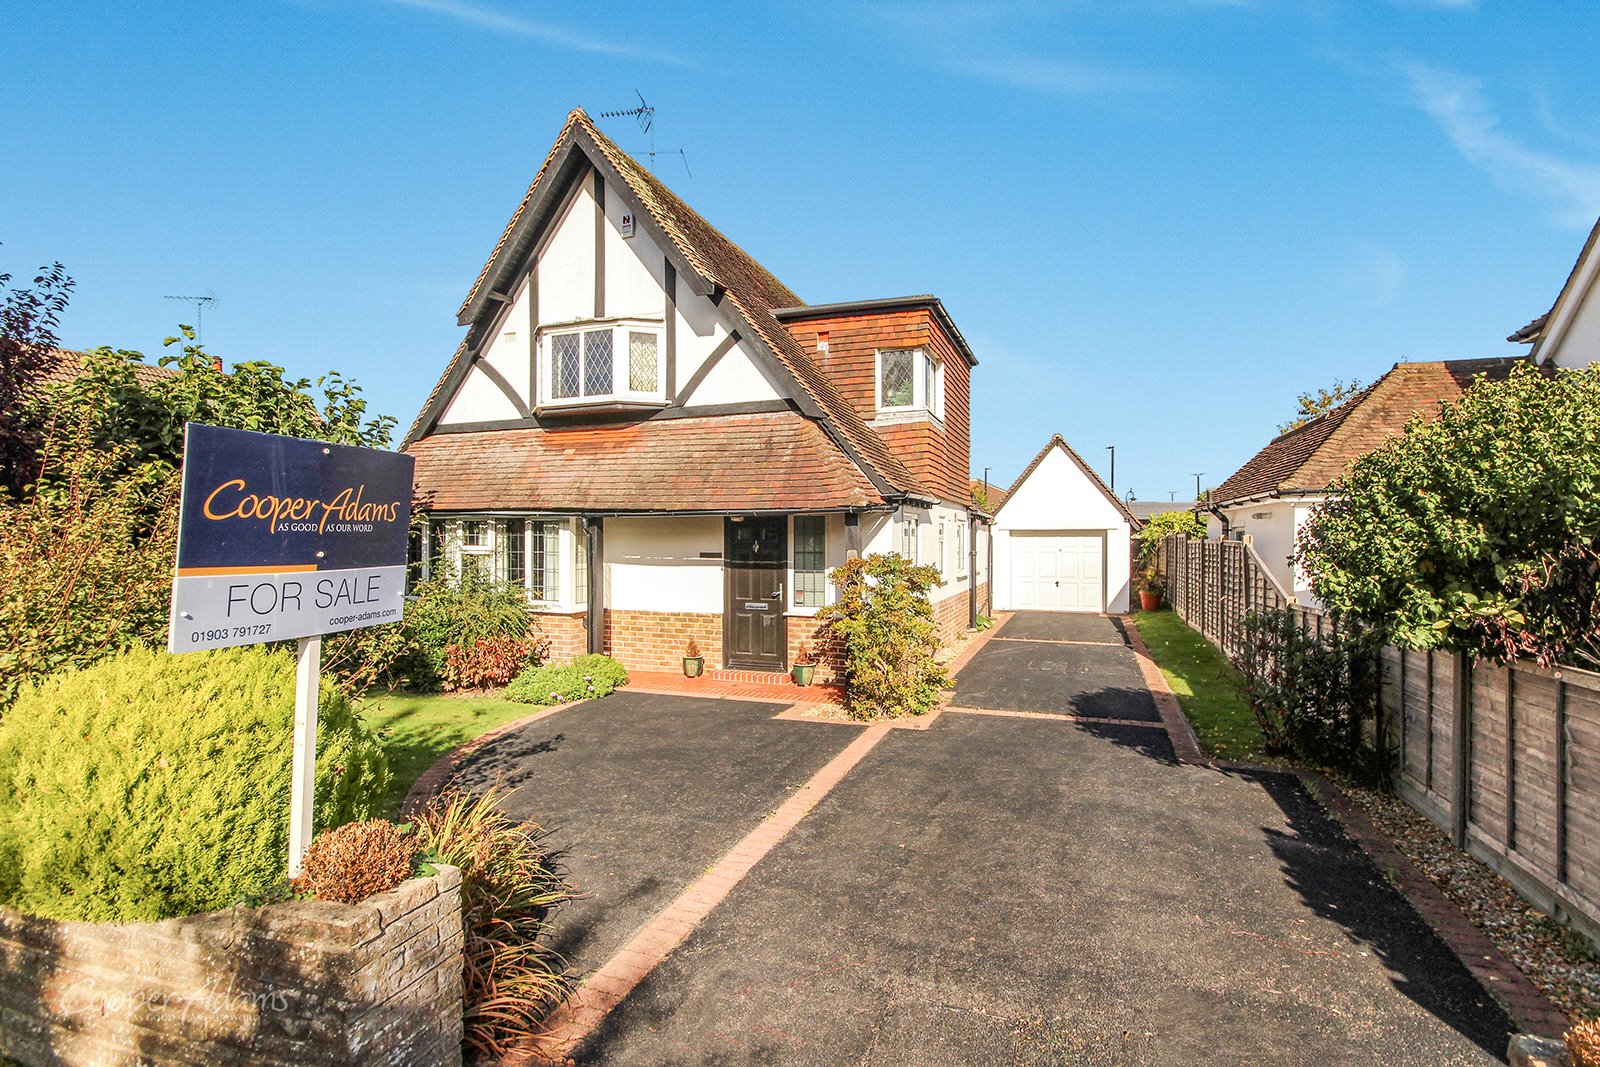 3 bed house for sale in Bushby Avenue, Rustington - Property Image 1